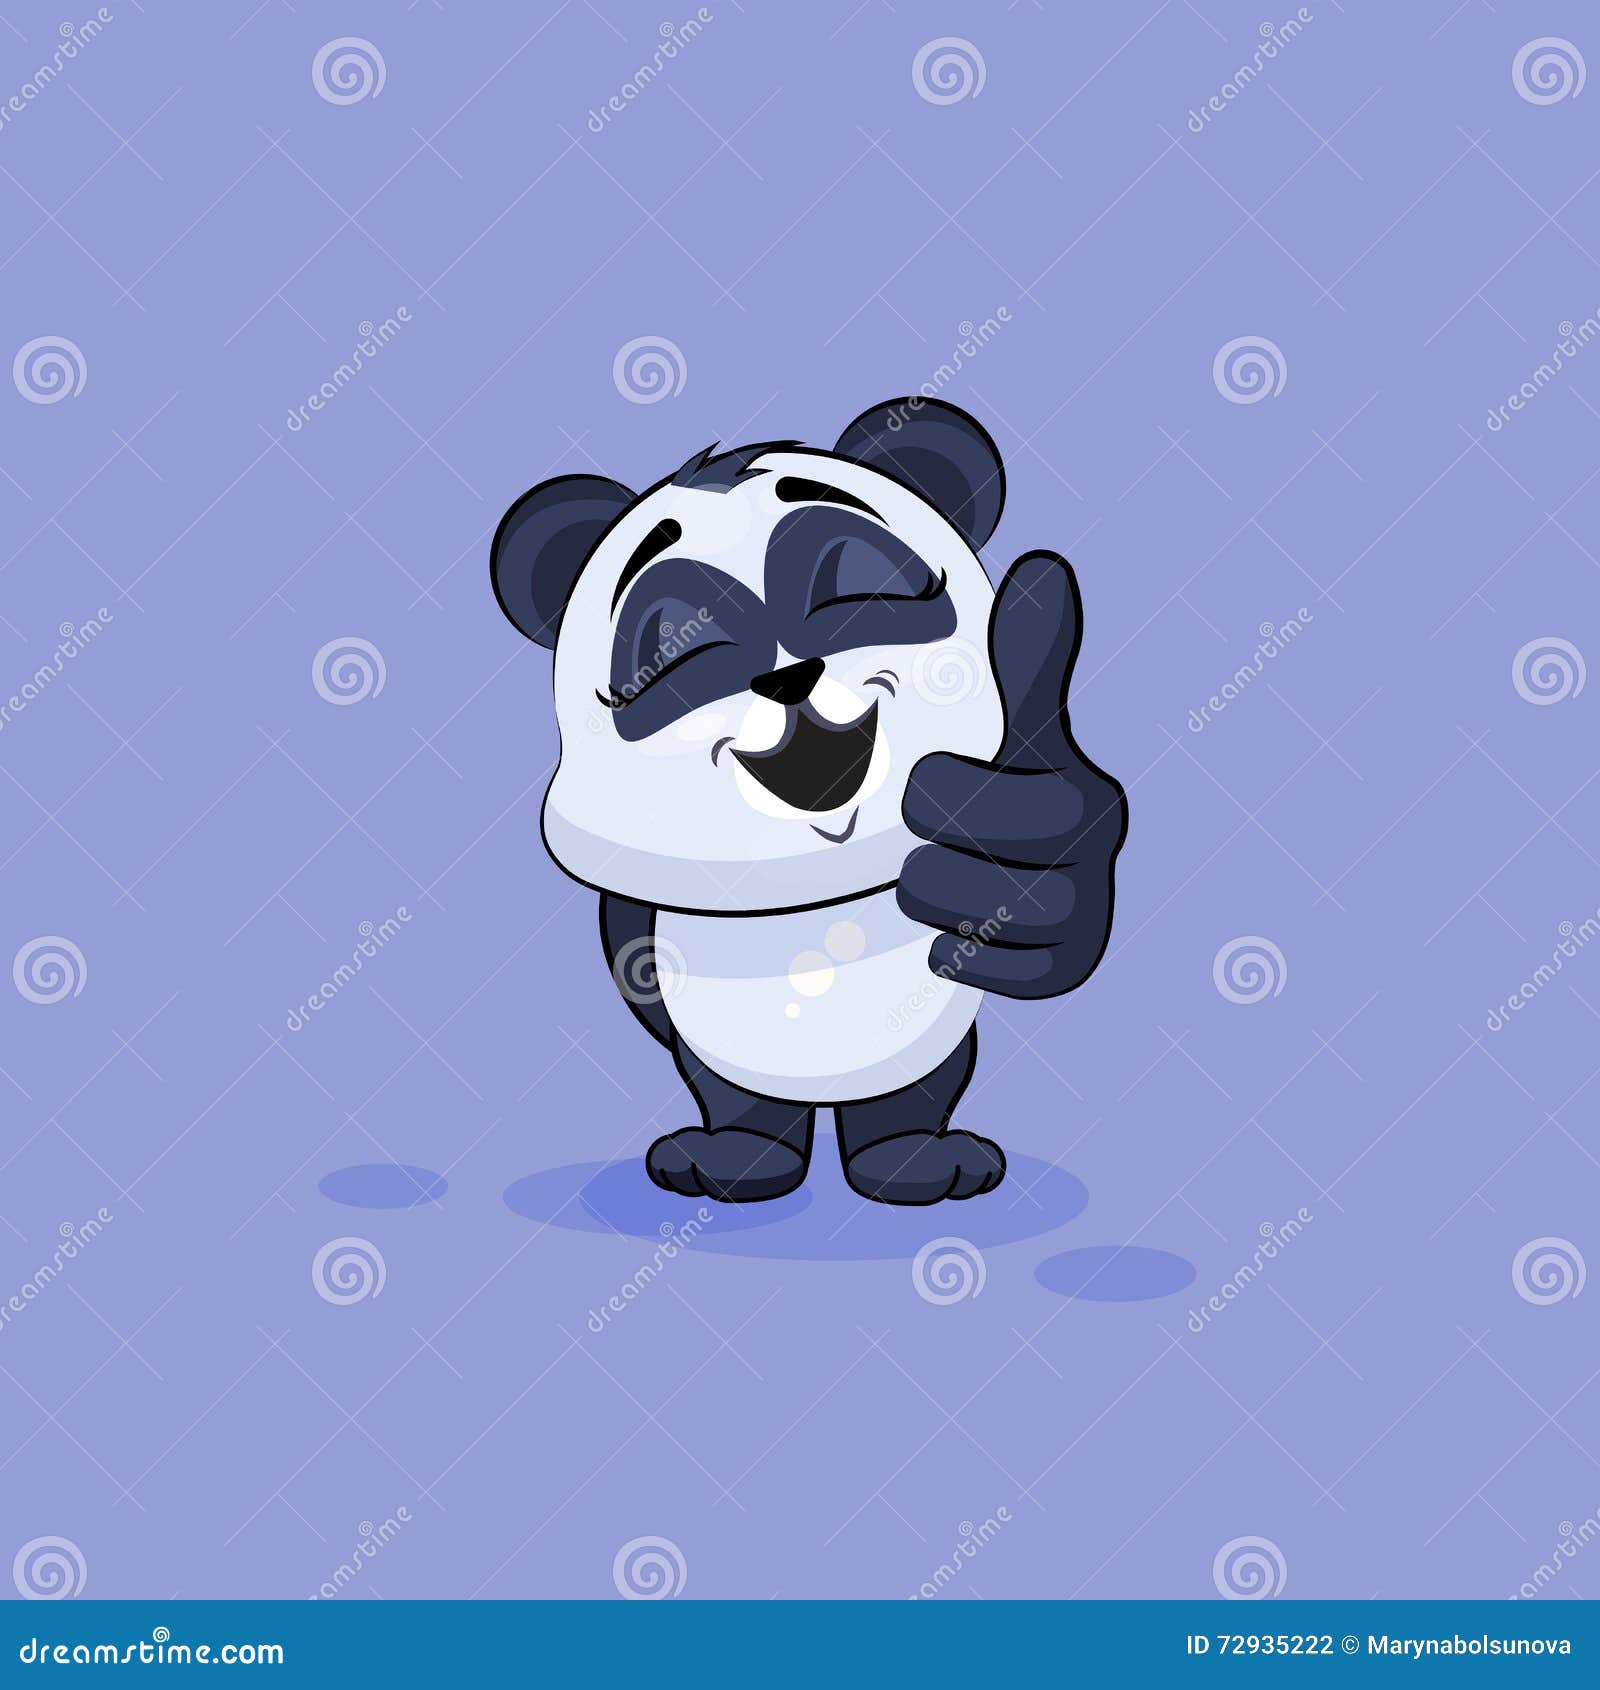 Illustration Emoji Character Cartoon Panda Approves with Thumb Up Sticker  Emoticon Stock Vector - Illustration of personage, emotion: 72935222